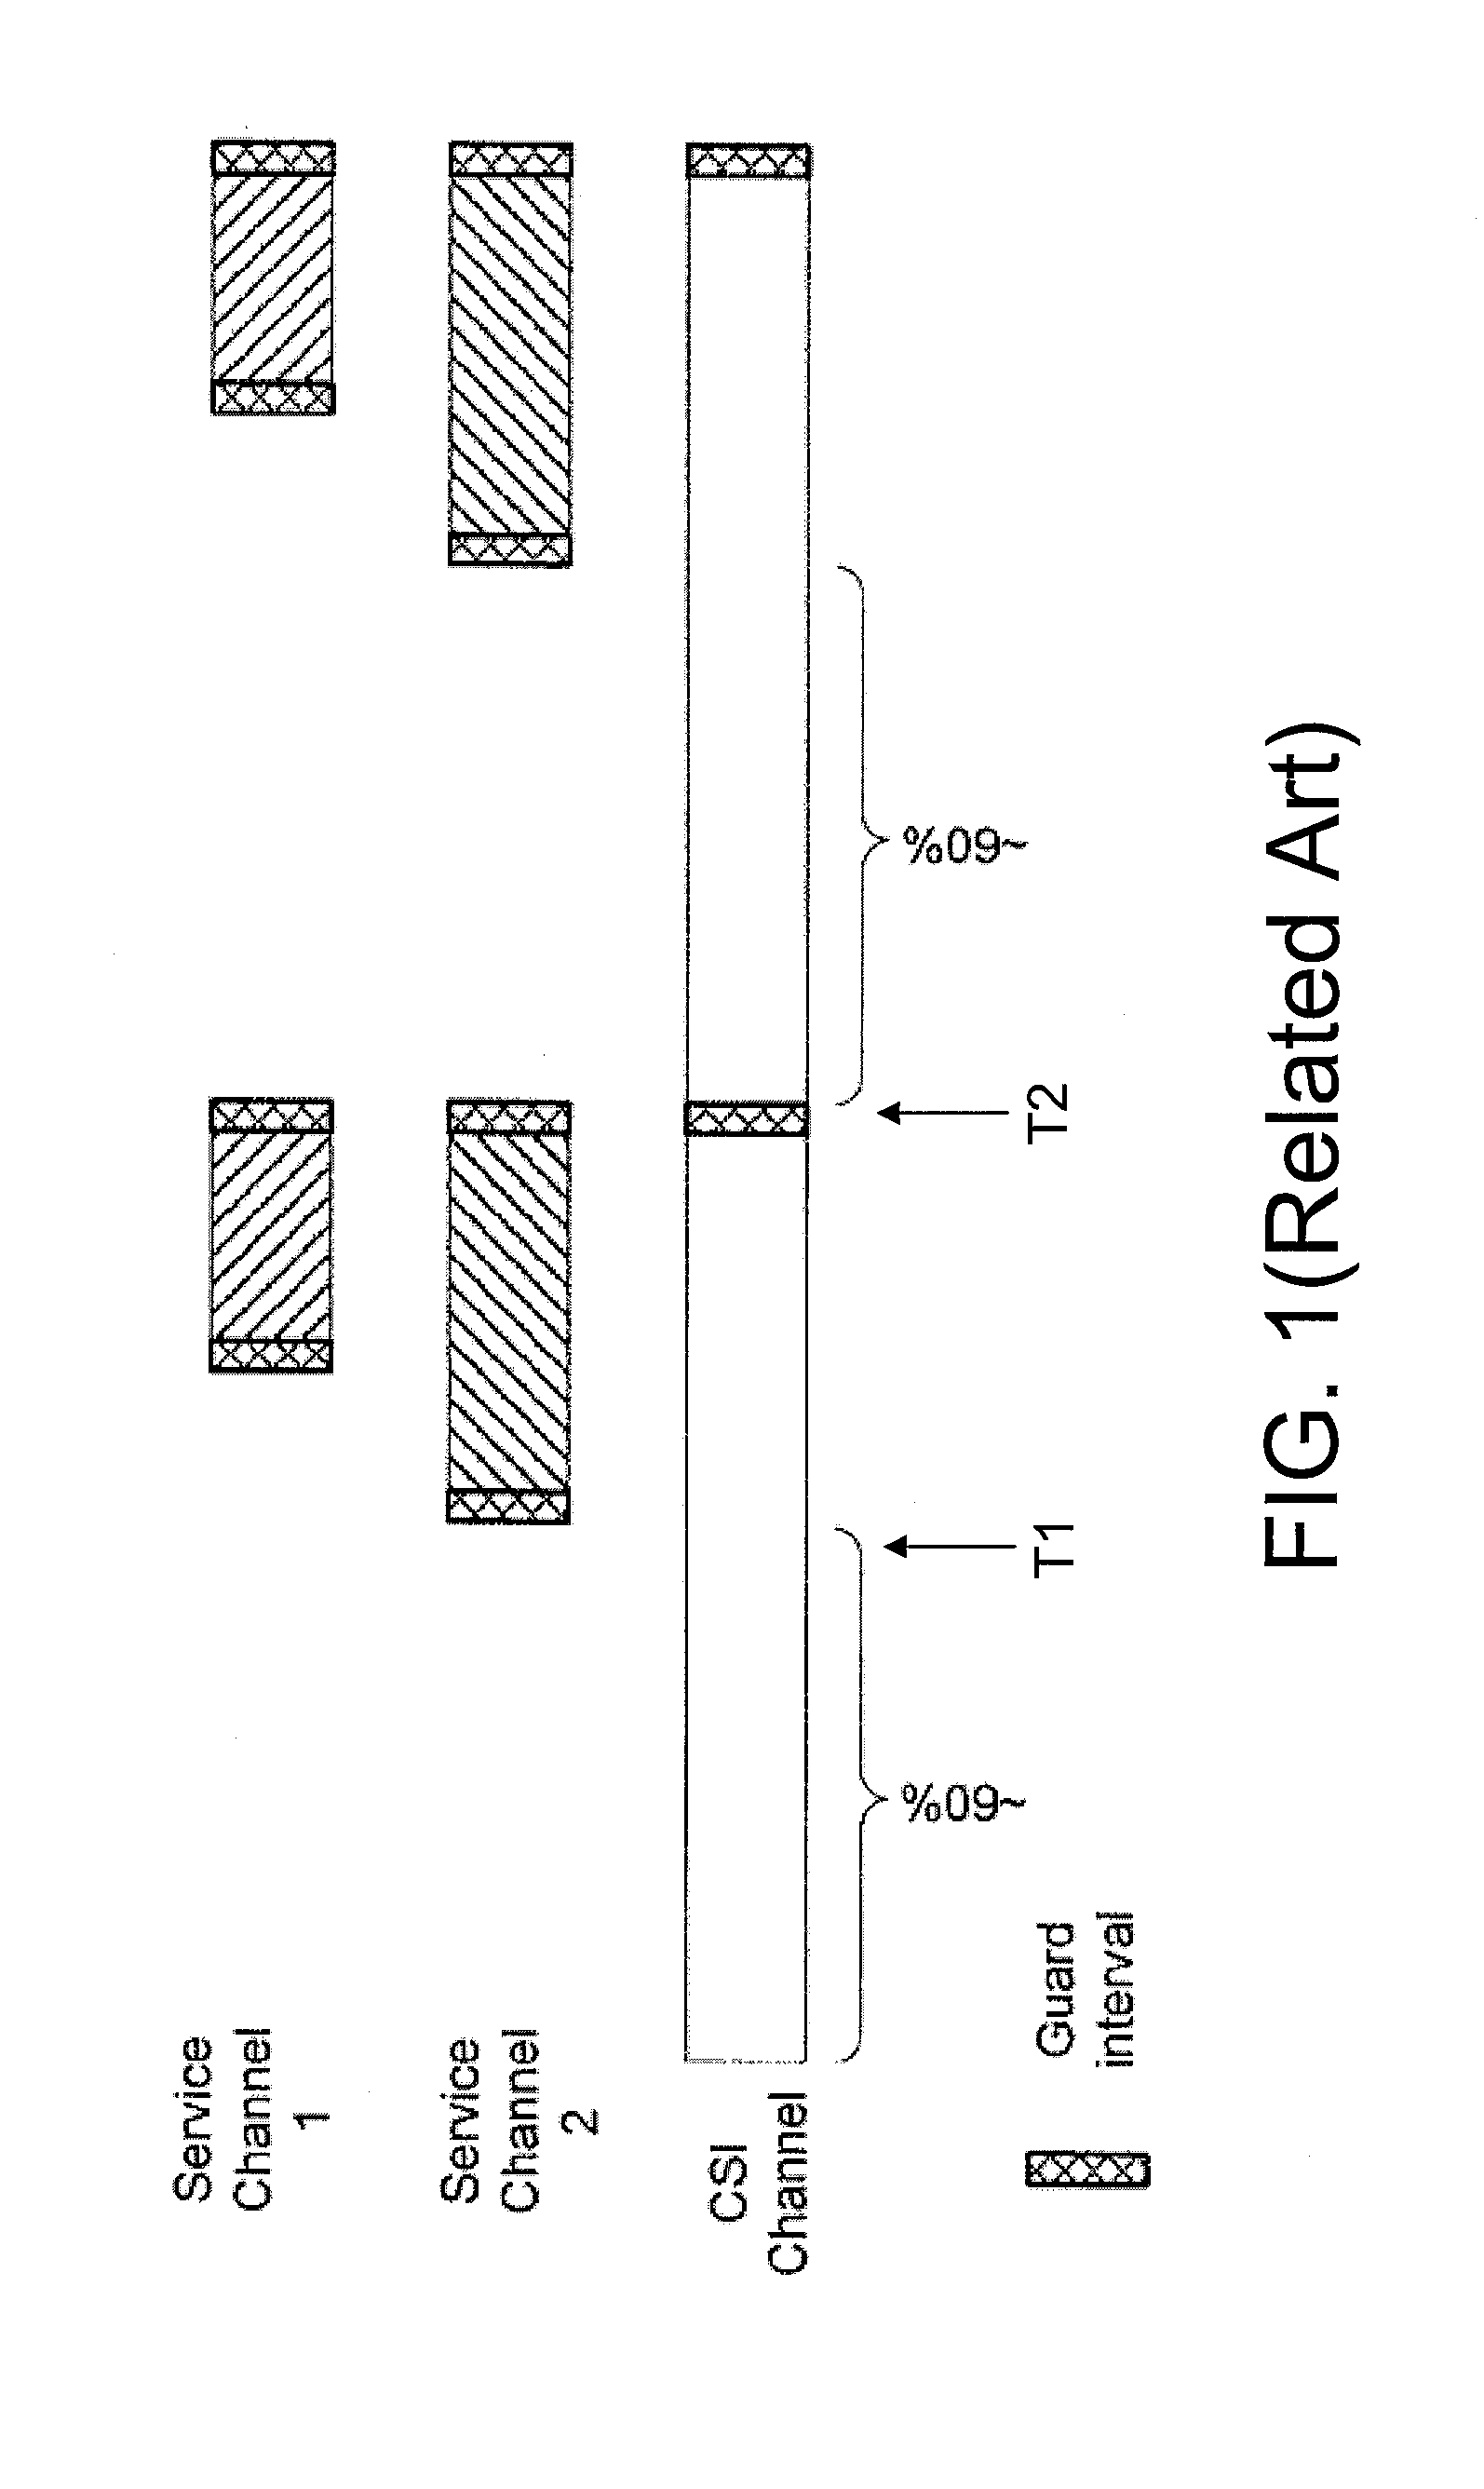 Method and system for extended service channel access on demand in an alternating wireless channel access environment